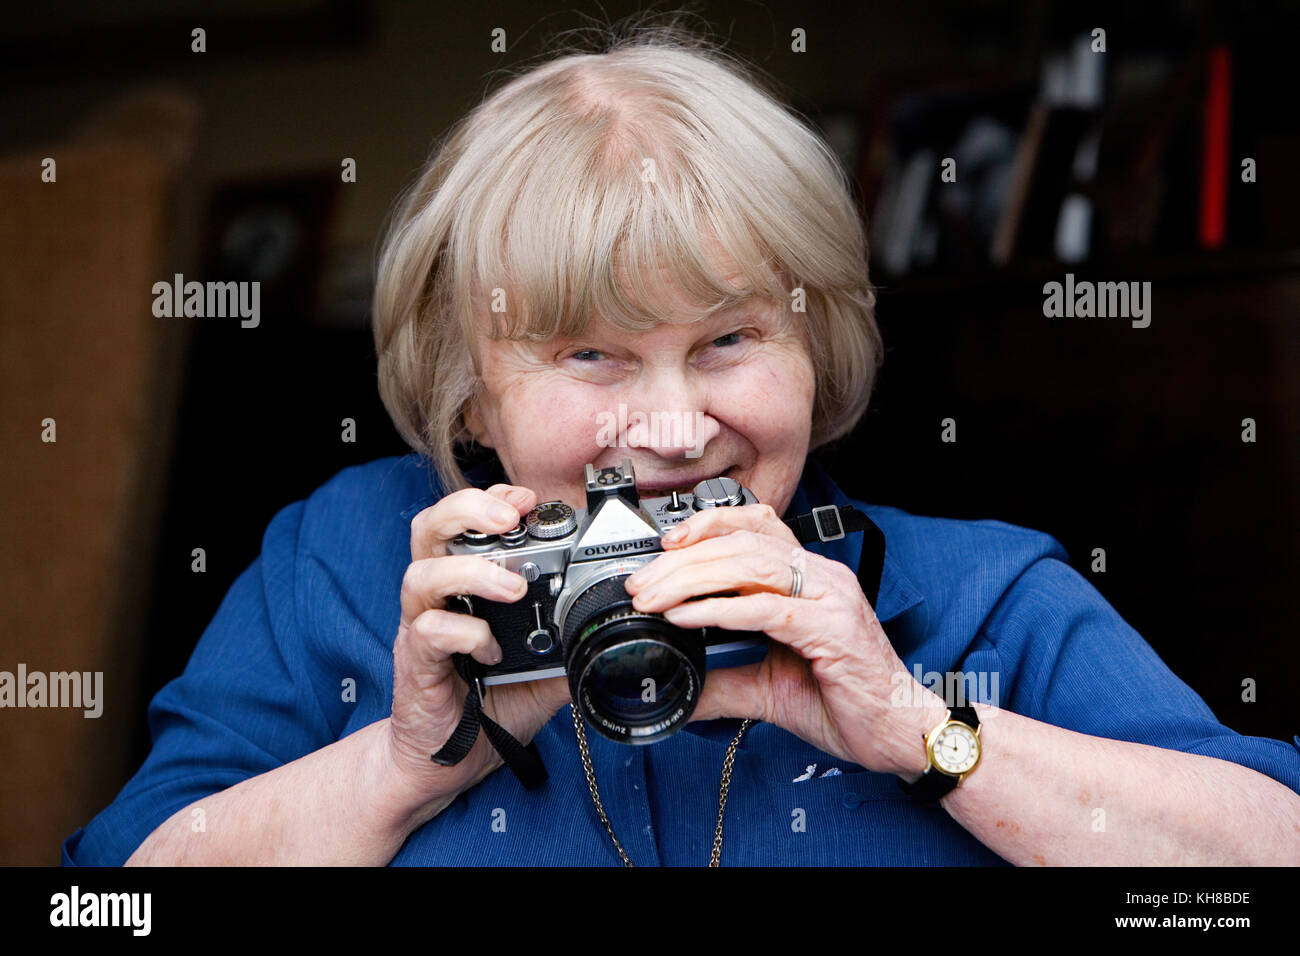 Photographer Jane Bown (13 March 1925 – 21 December 2014), portrait holding camera Stock Photo